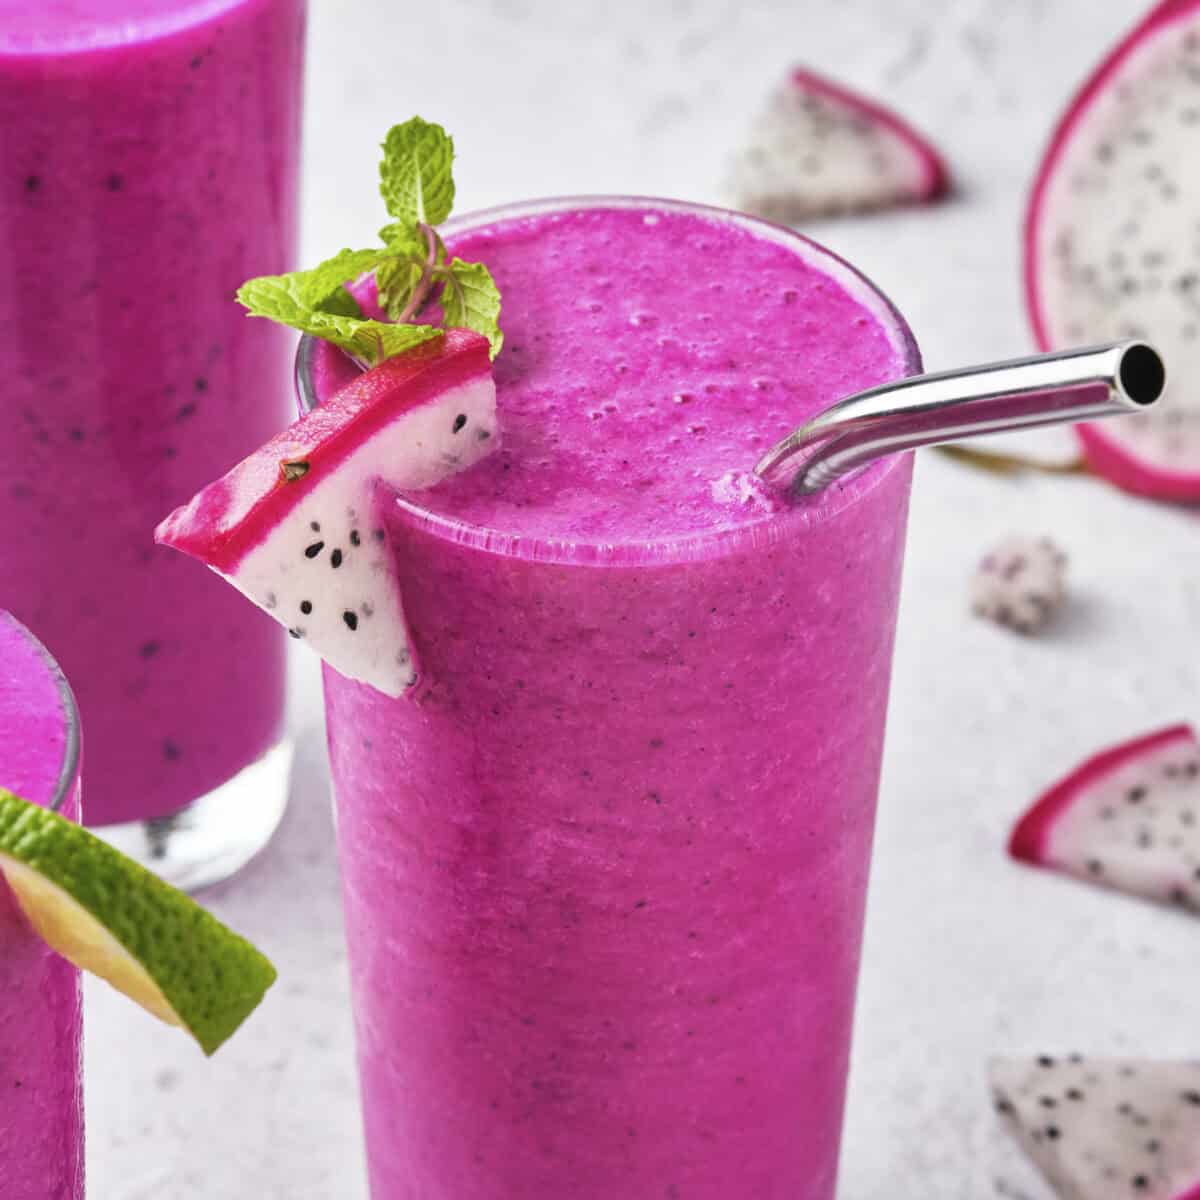 Vibrant dragon fruit smoothie with a piece of dragon fruit sliced on the top edge with a straw.